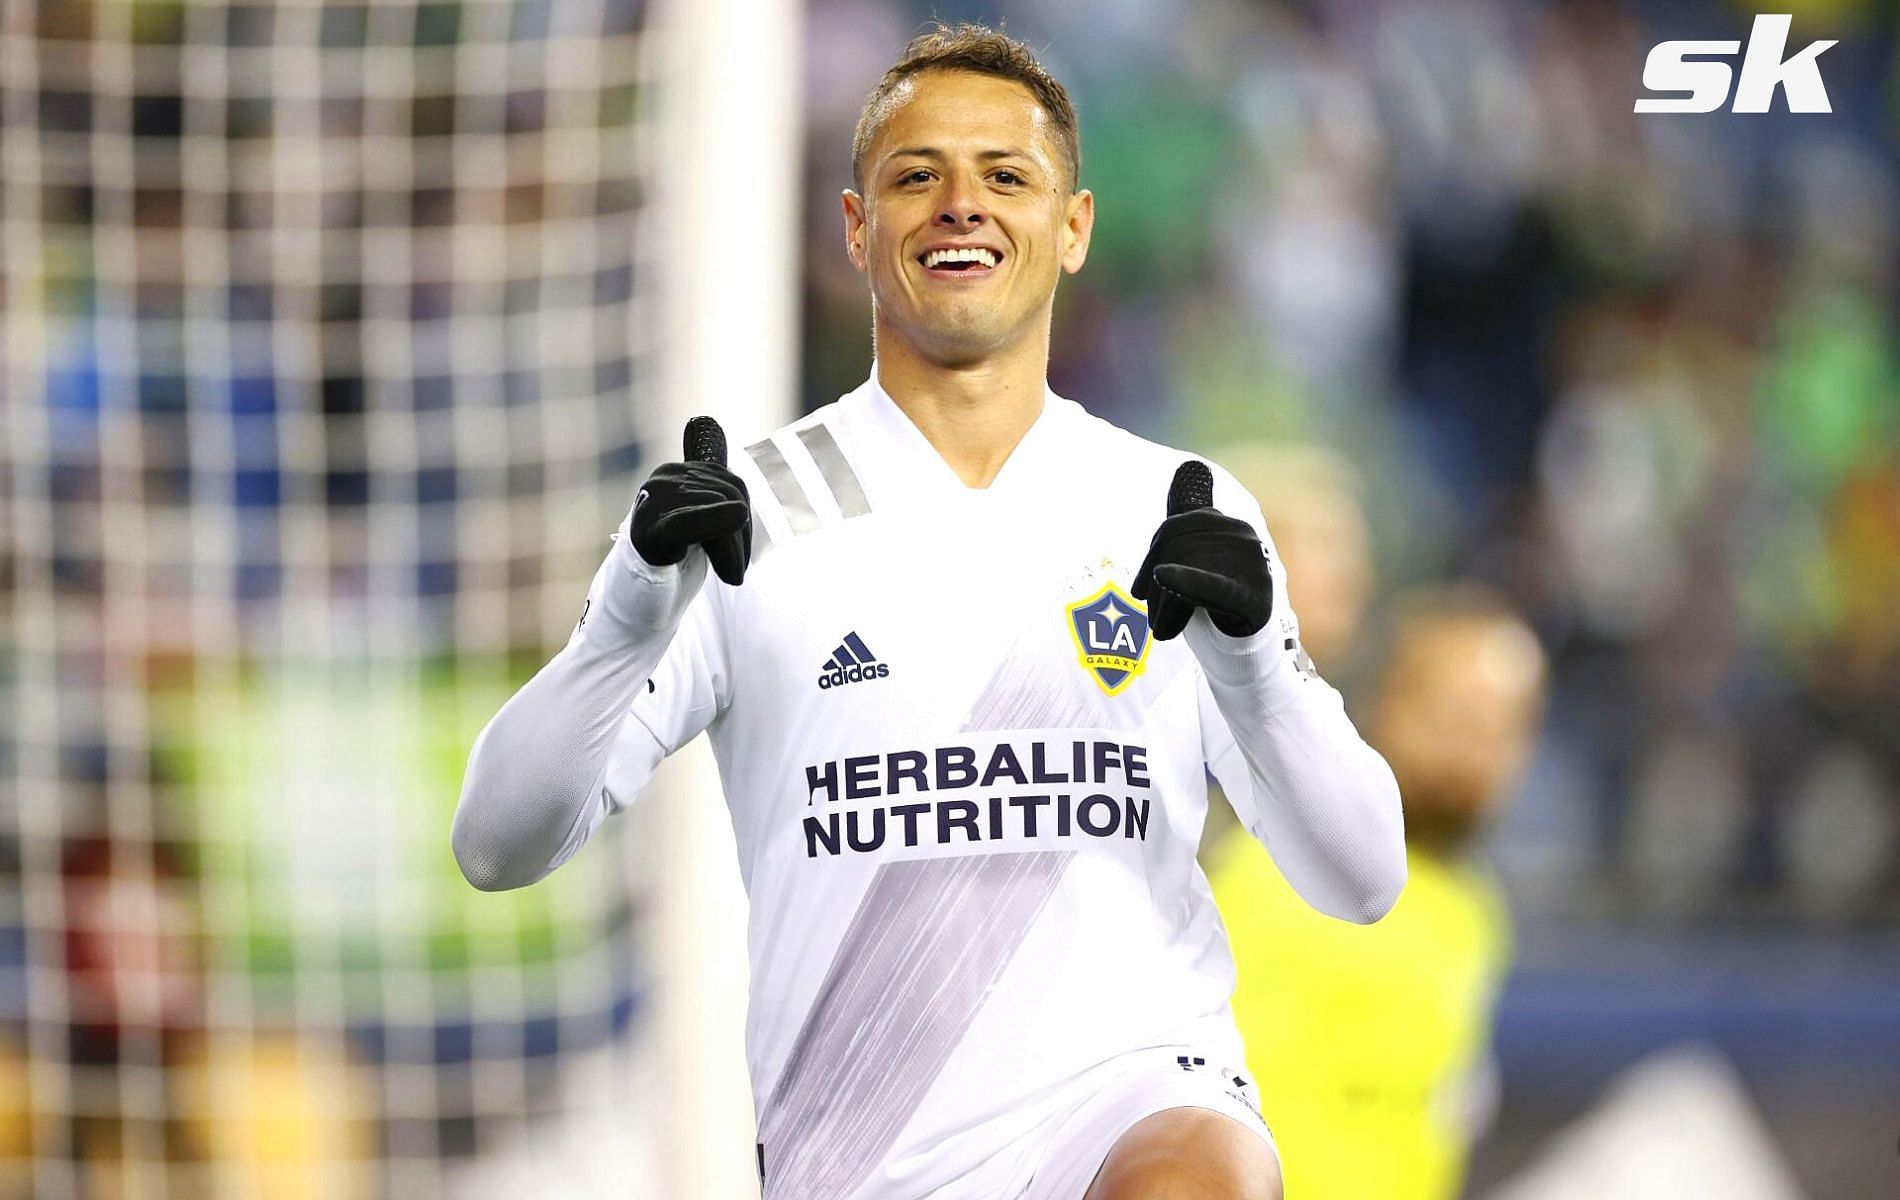 Hernandez has lit up the MLS with his performances